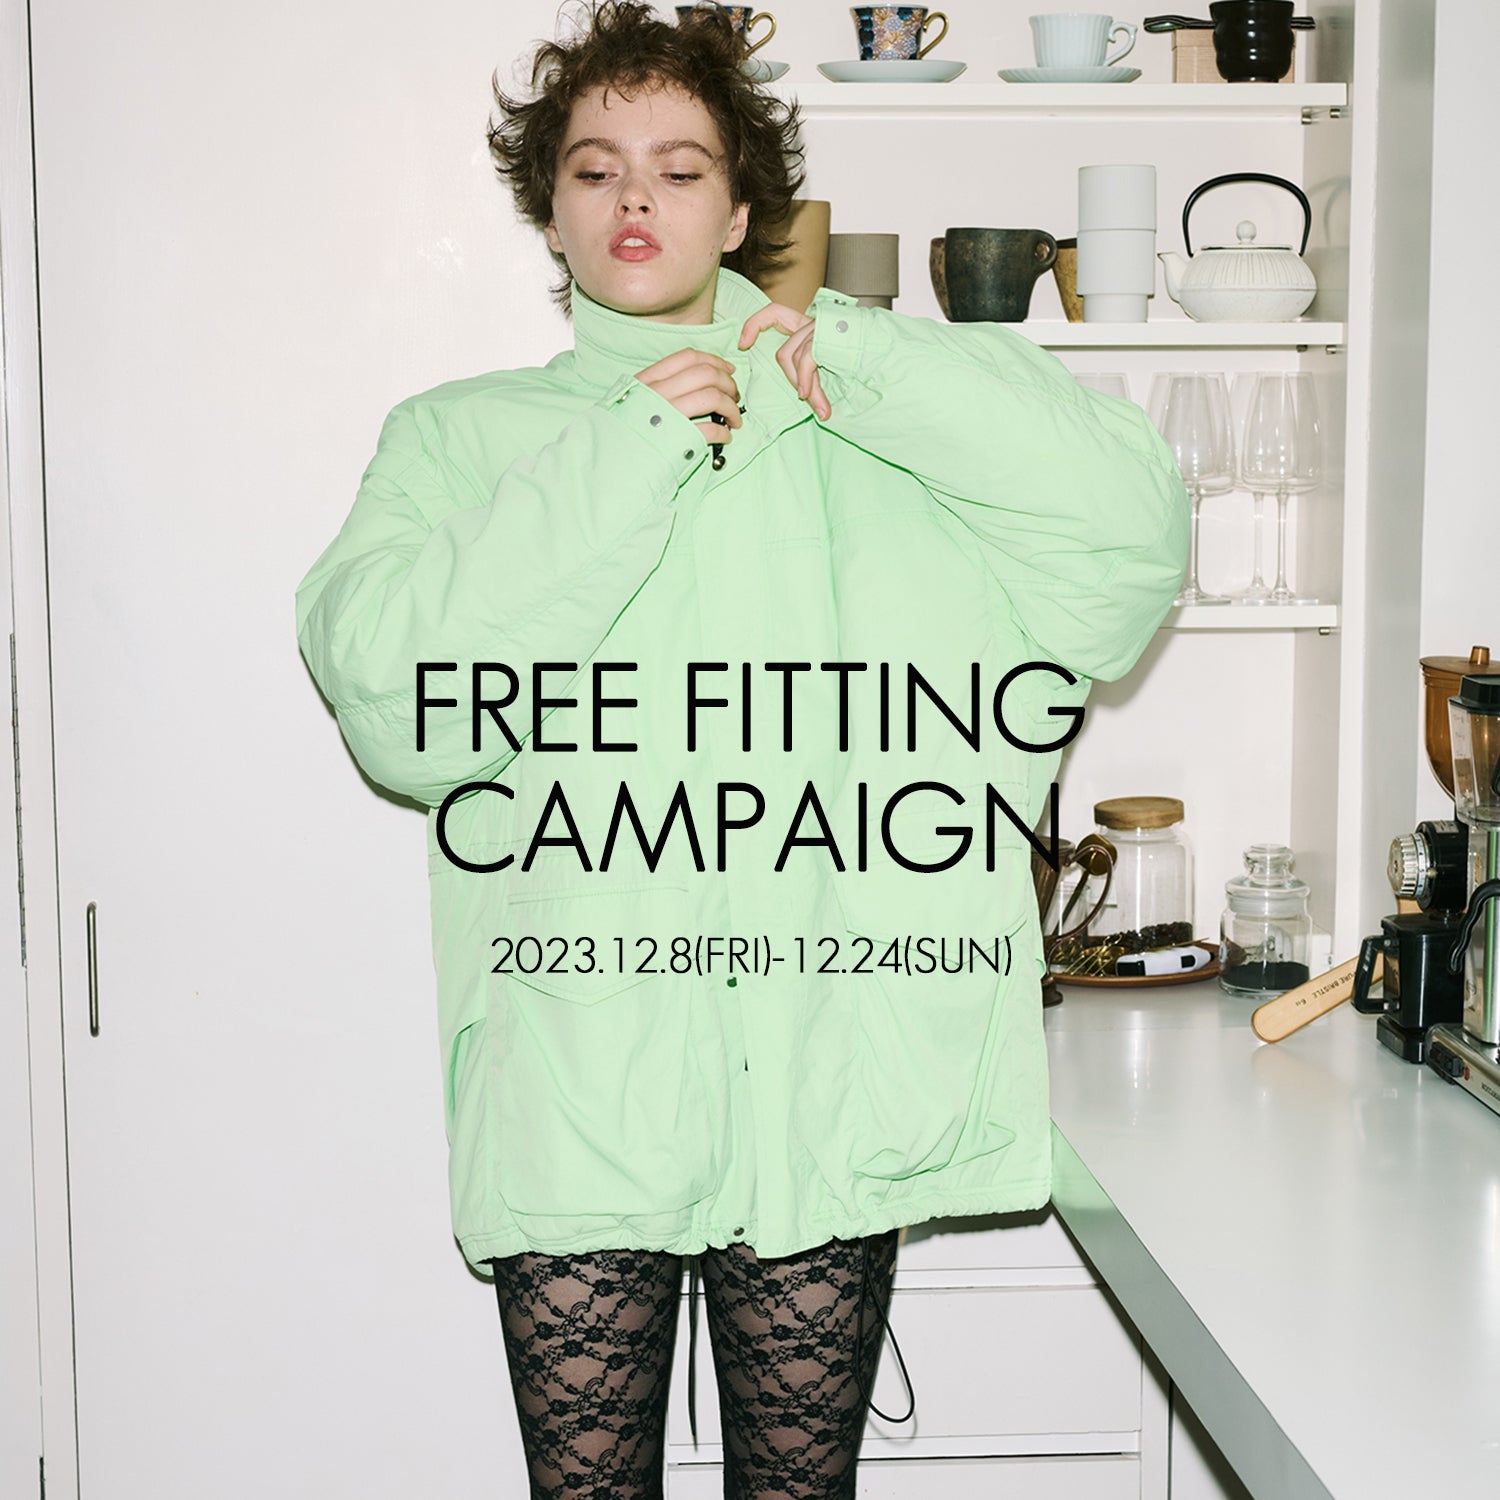 【FREE FITTING CAMPAIGN】 ご自宅でご試着、返品送料無料キャンペーン開催。